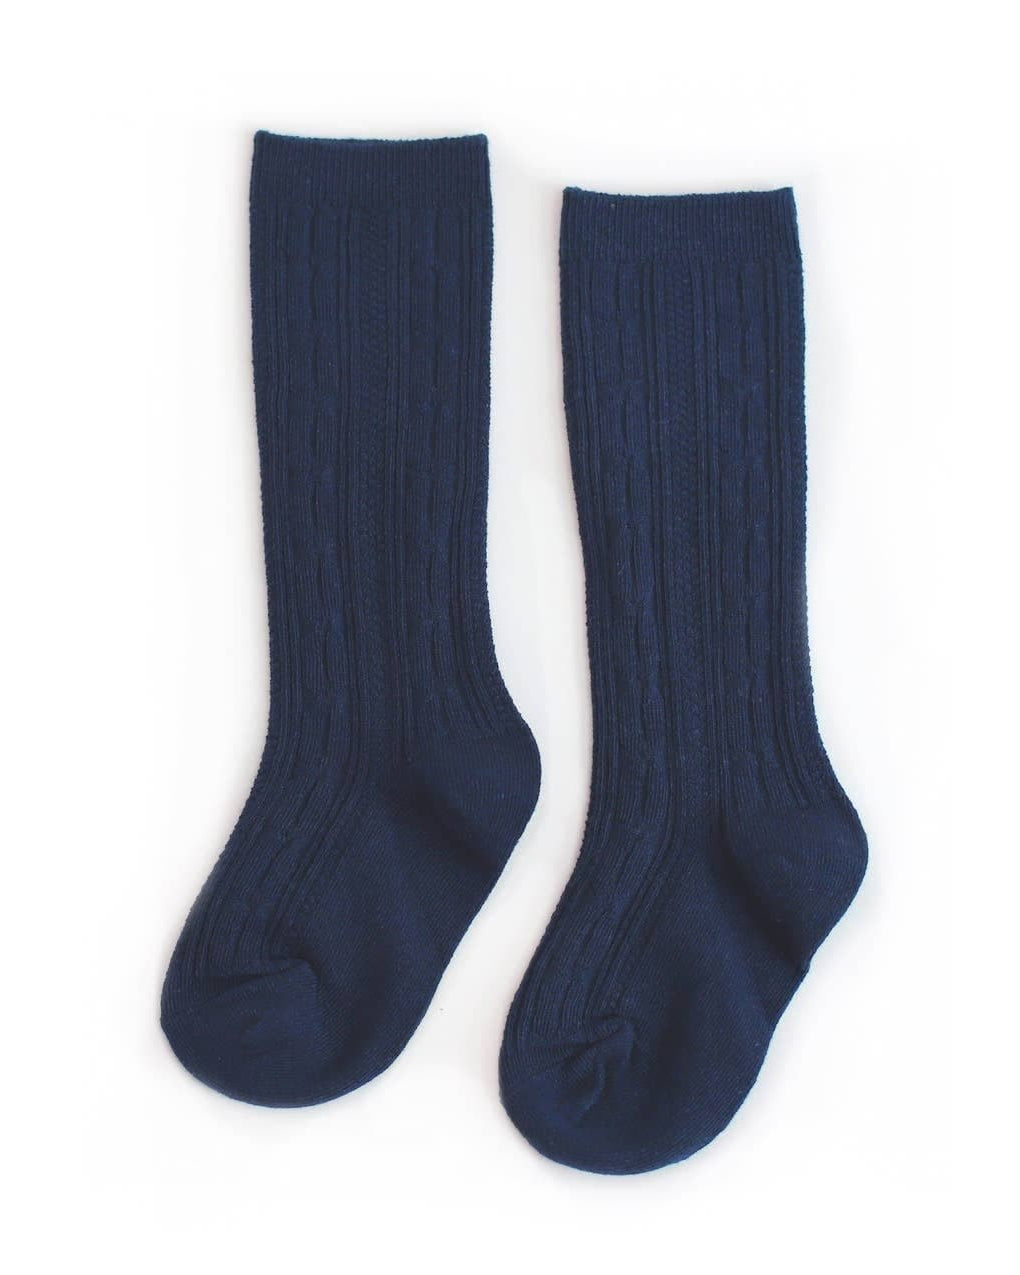 Navy Knee High Socks  A Touch of Magnolia Boutique   